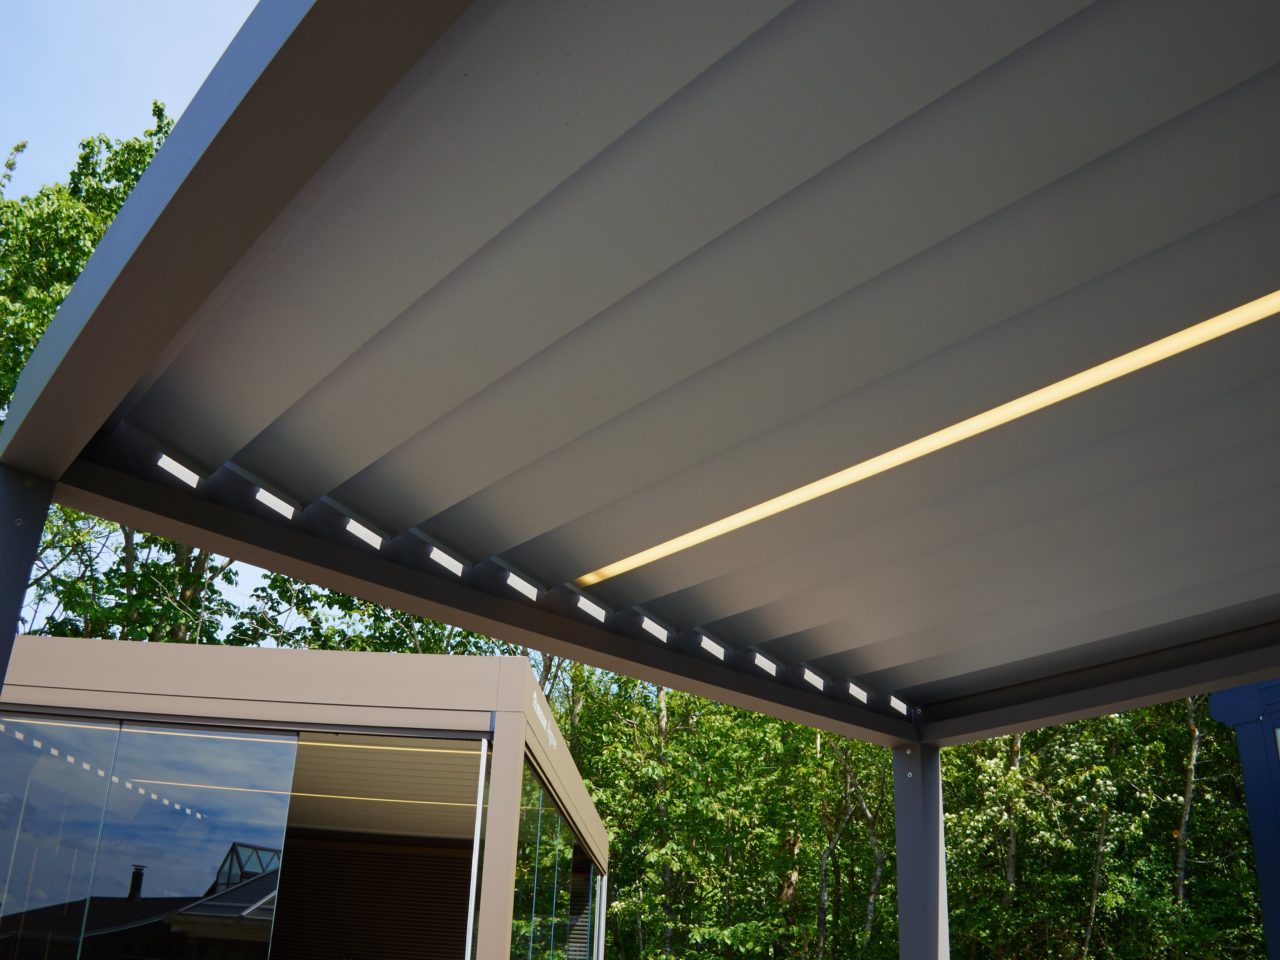 https://www.rpsmetalroofing.com/wp-content/uploads/2022/07/metal-roof-patio-cover-1280x960.jpg